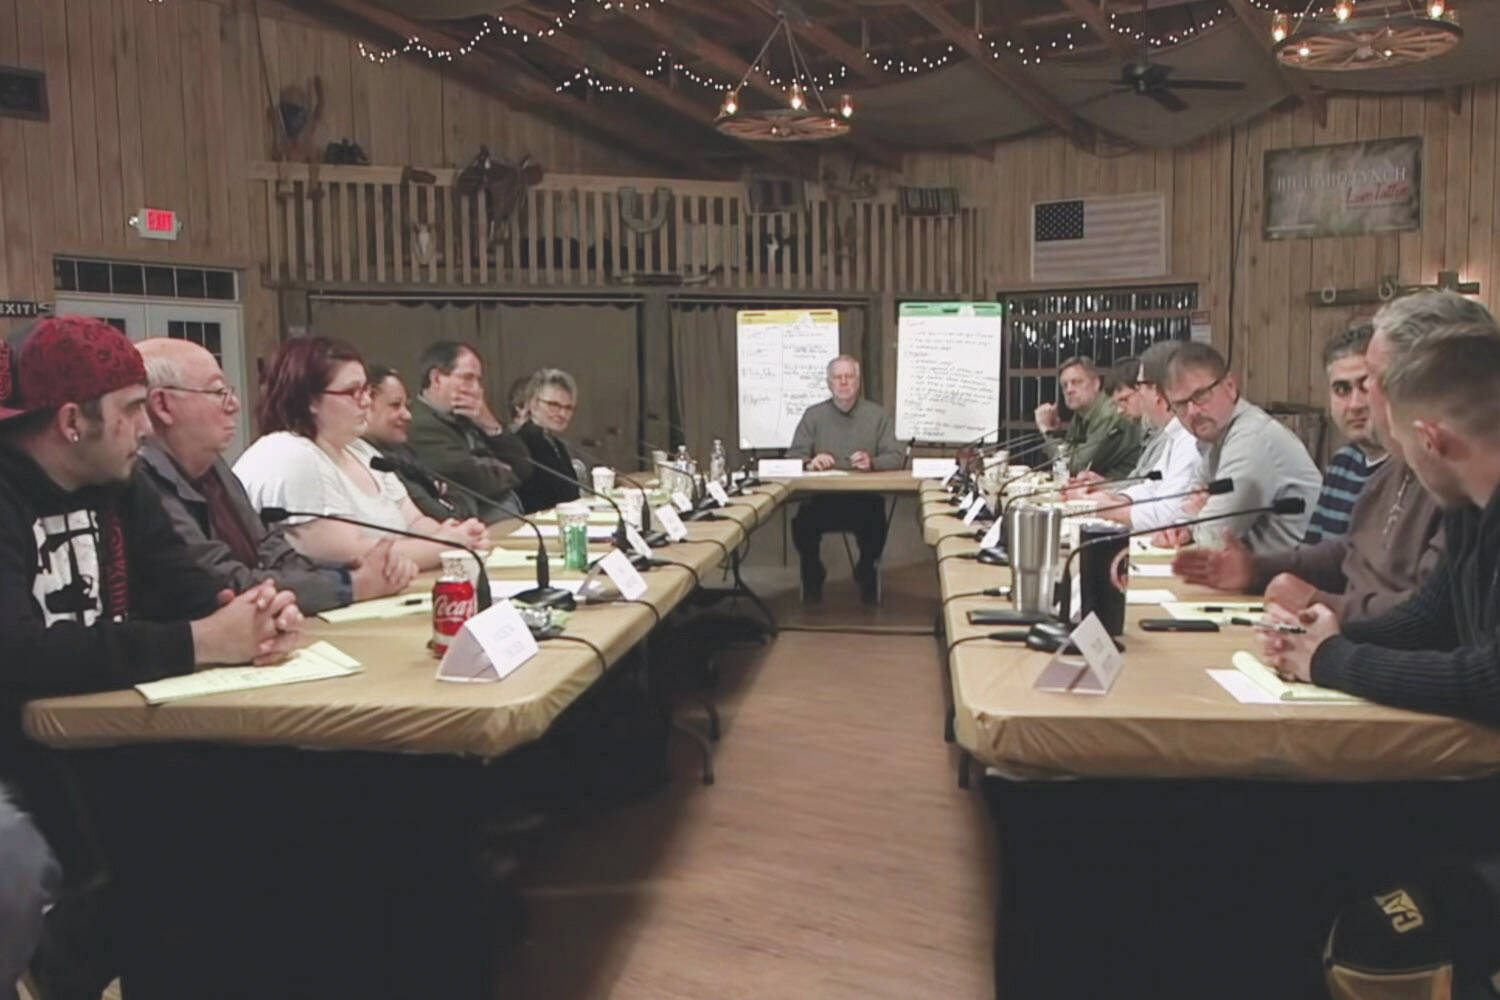 People identifying as Democrats and people identifying as Republicans sit face to face during a workshop put on by Braver Angels in this screenshot from “Braver Angels: Reuniting America.” (Screenshot courtesy Braver Angels)